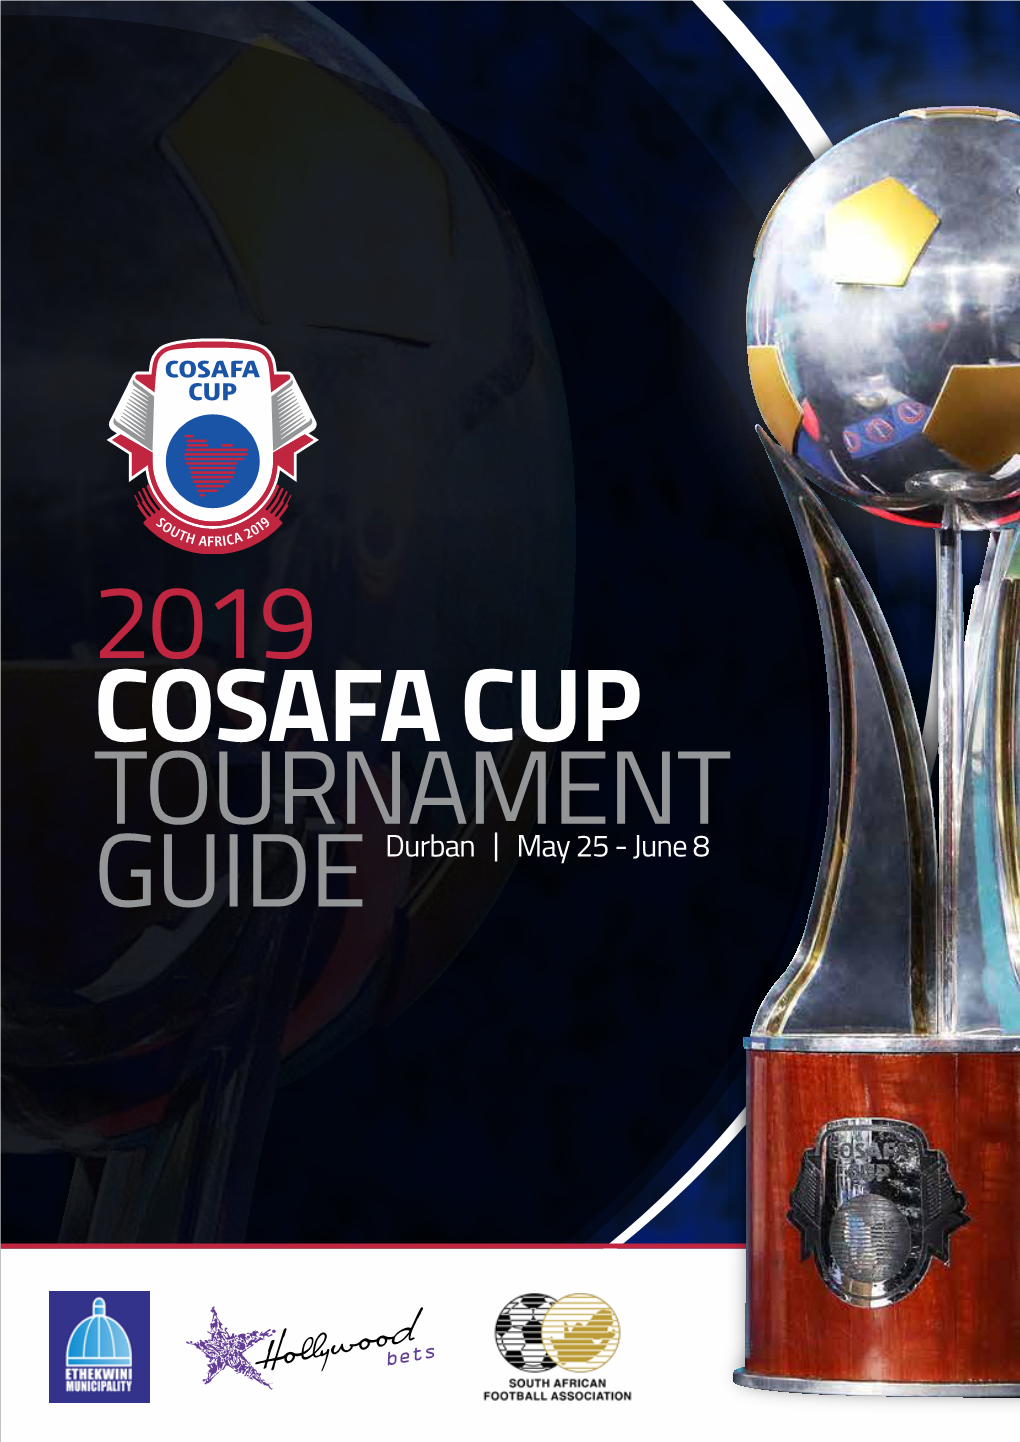 2019 Cosafa Cup Tournament Guide Durban | May 25 - June 8 Walk in Your Sporting Heroes’ Footsteps